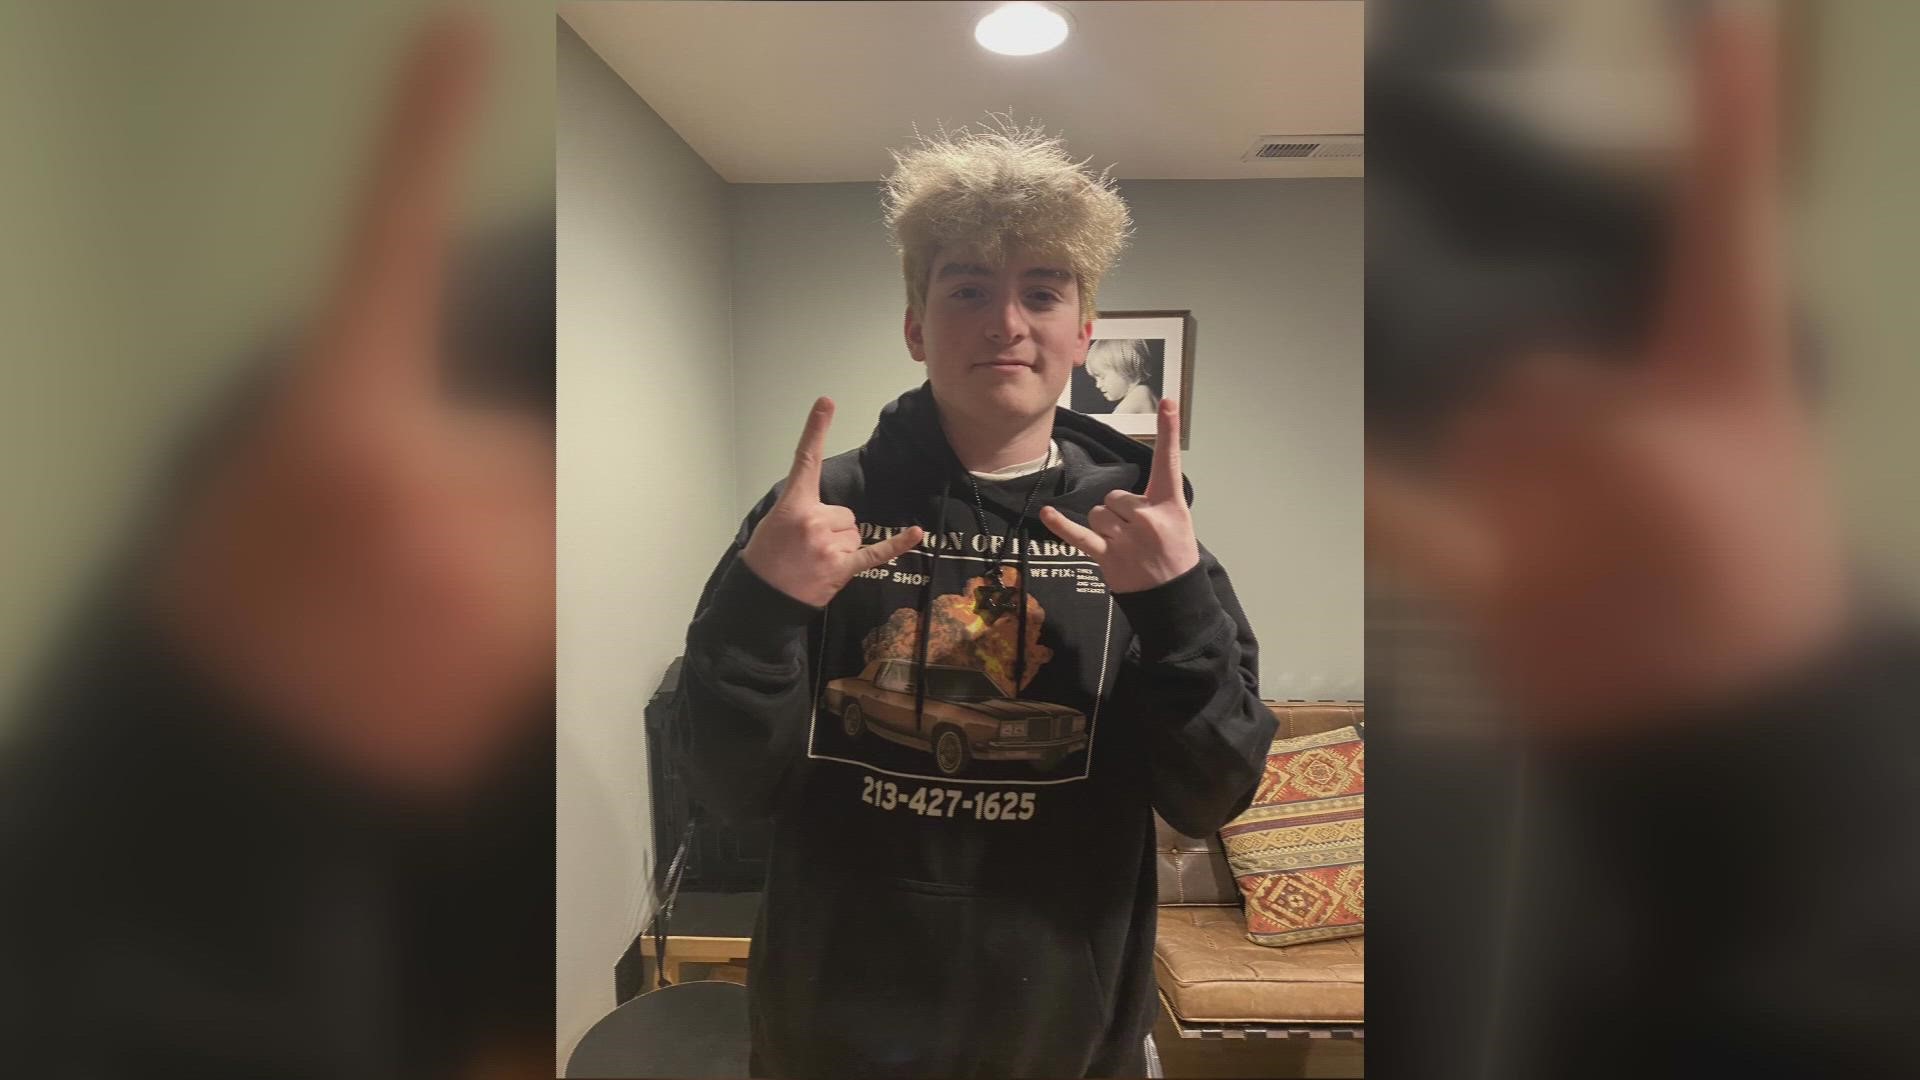 Griffin Hoffmann, 16, died in March 2022 after taking a single counterfeit prescription pain pill. His coach wants to make a difference, and to protect other teens.